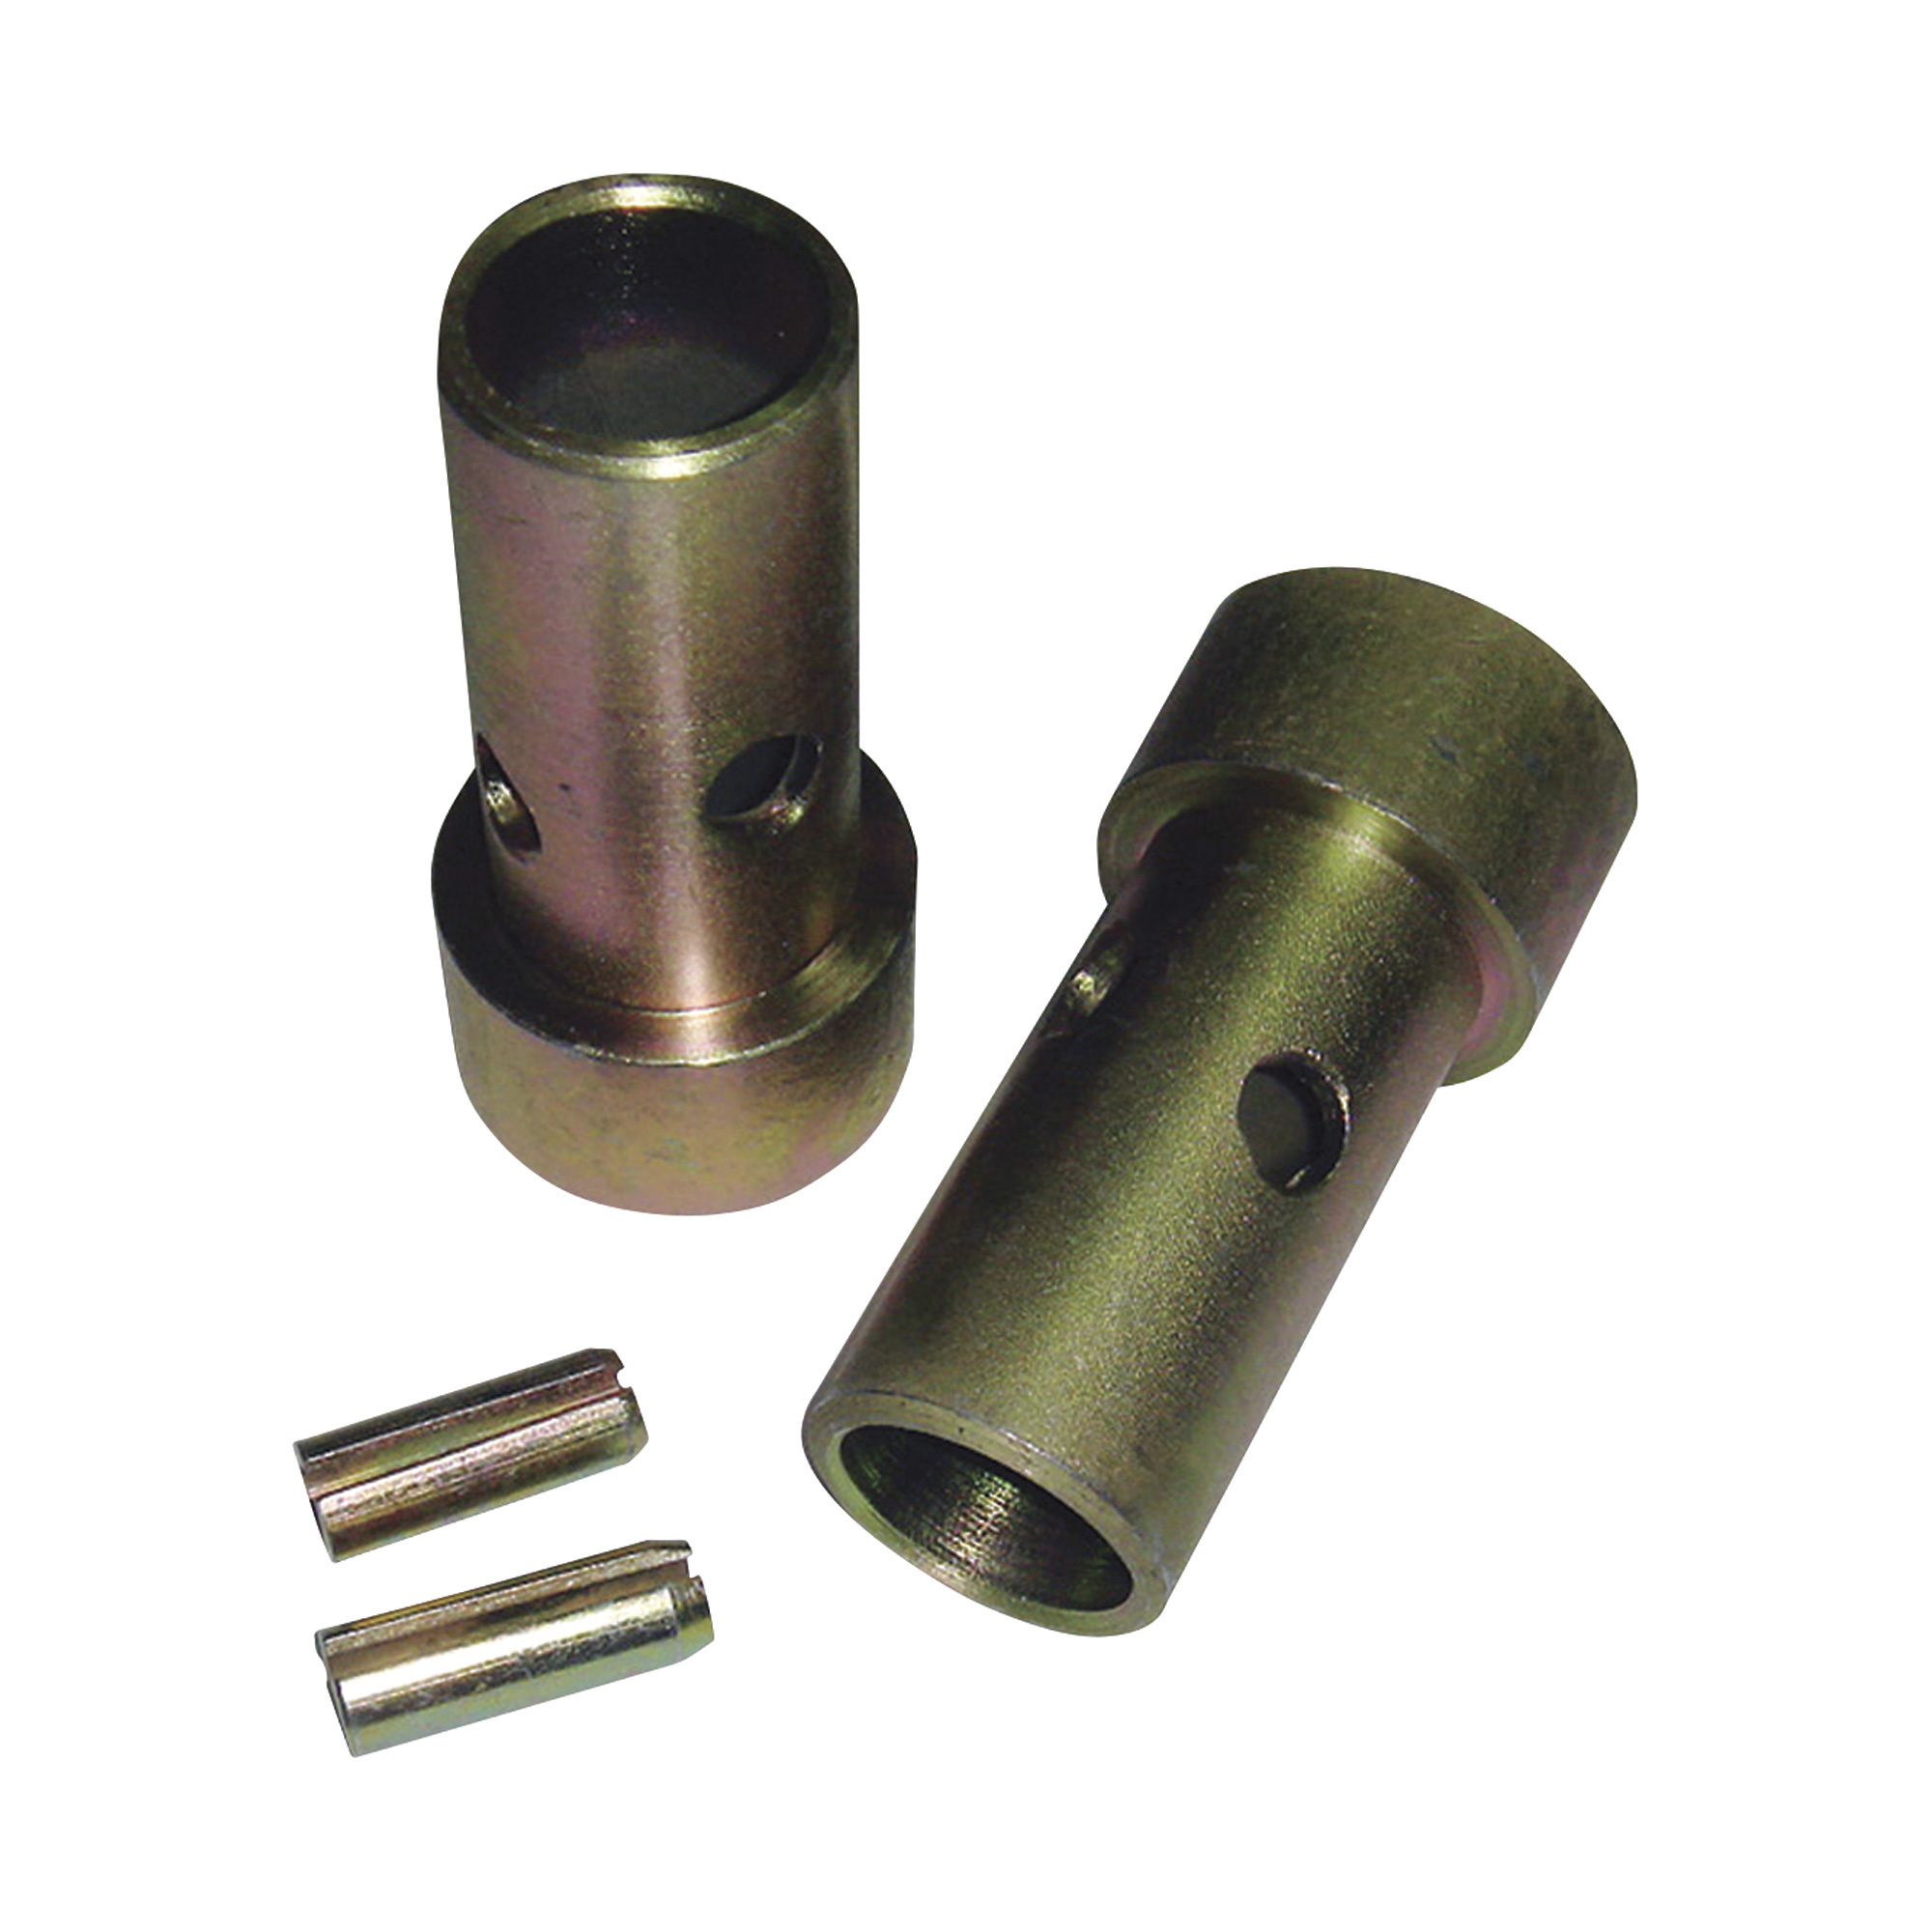 NorTrac Quick-Hitch Bushing Set, Fits Category 2 Hitches